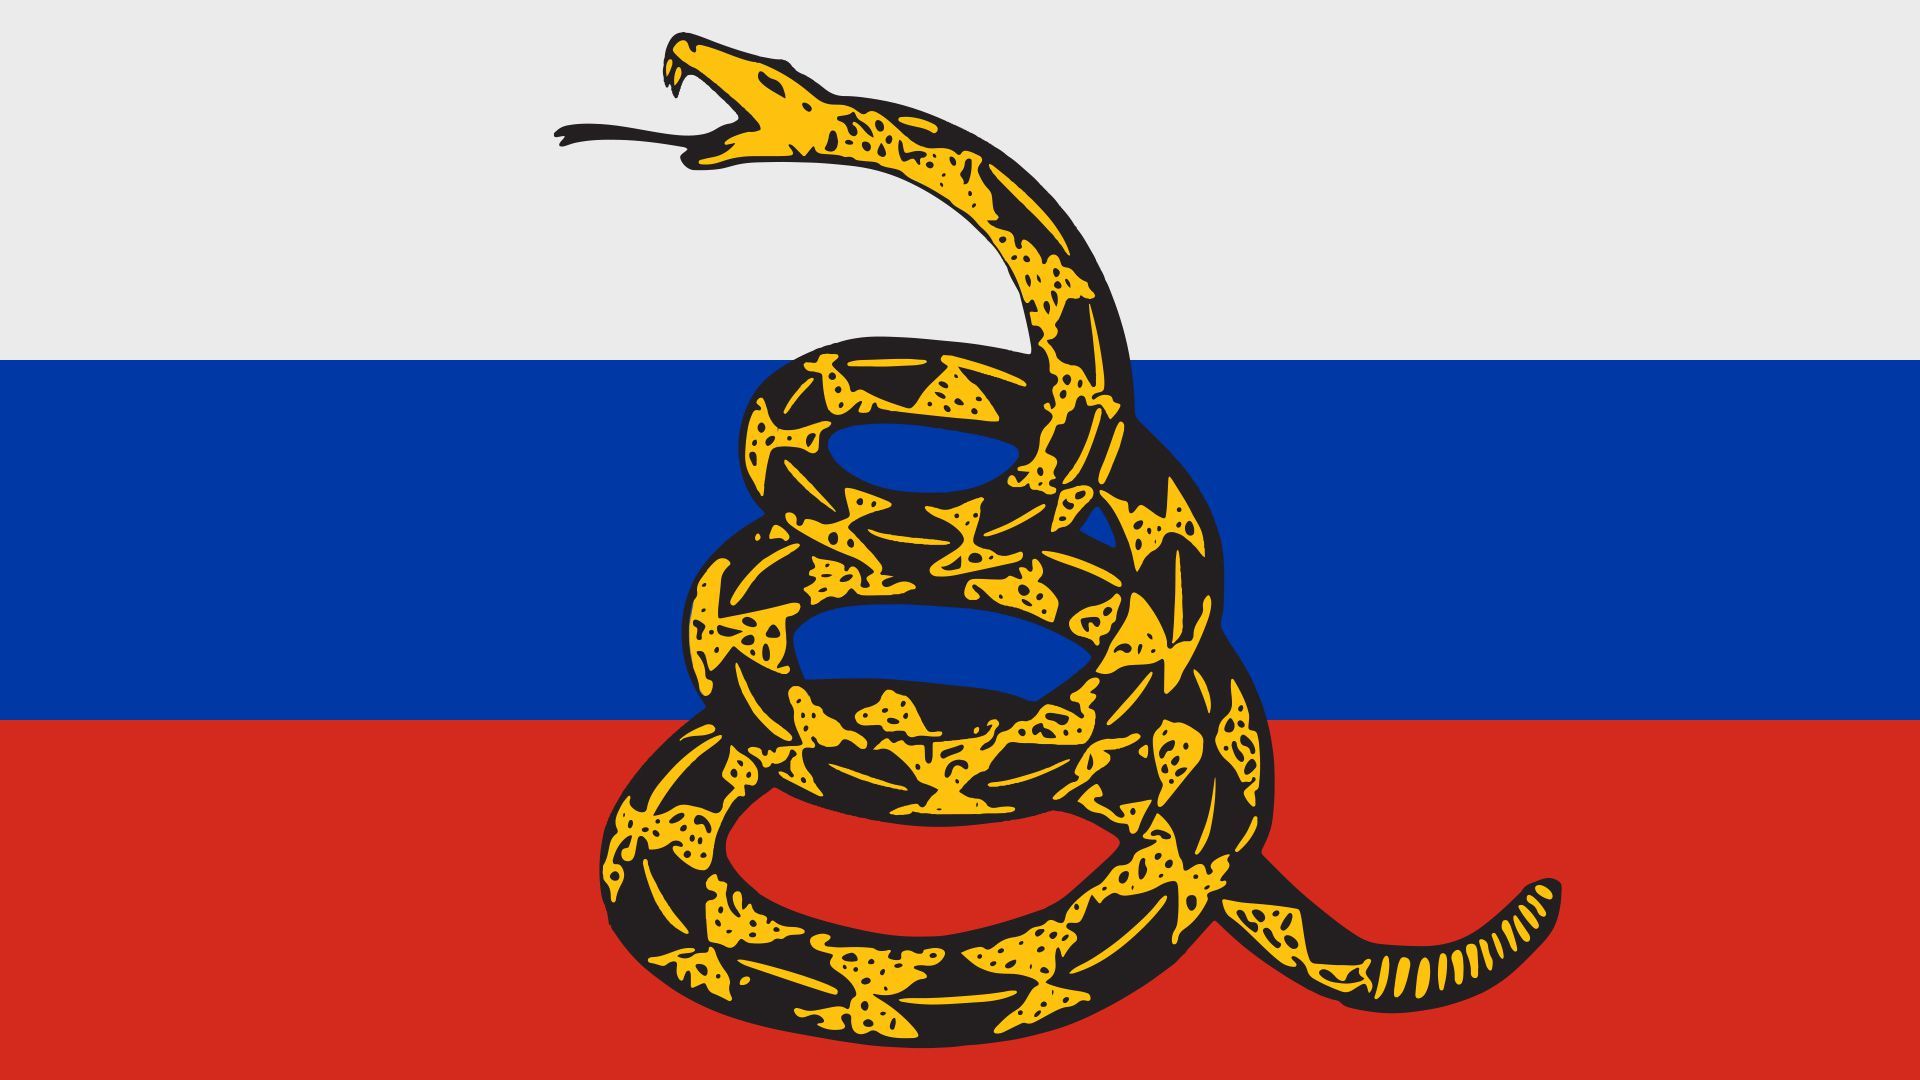 Illustration of the Russian flag with the Gadsden snake overlaid.  